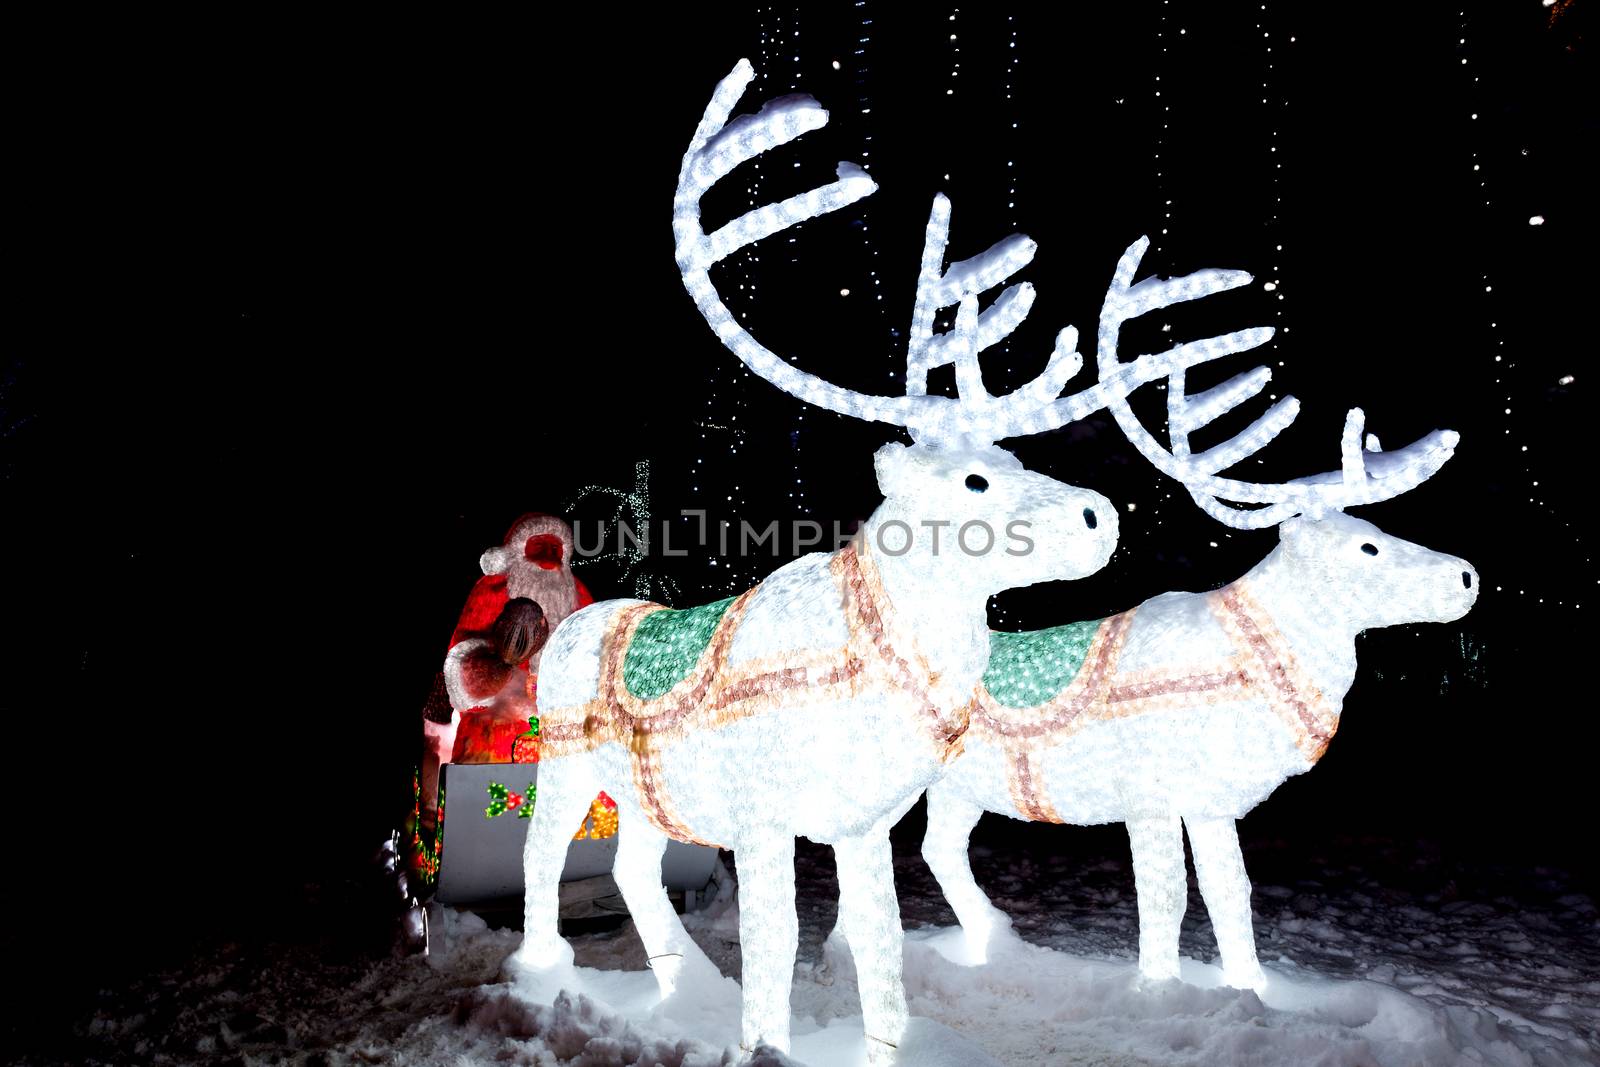 The photograph depicts Santa Claus in a sleigh